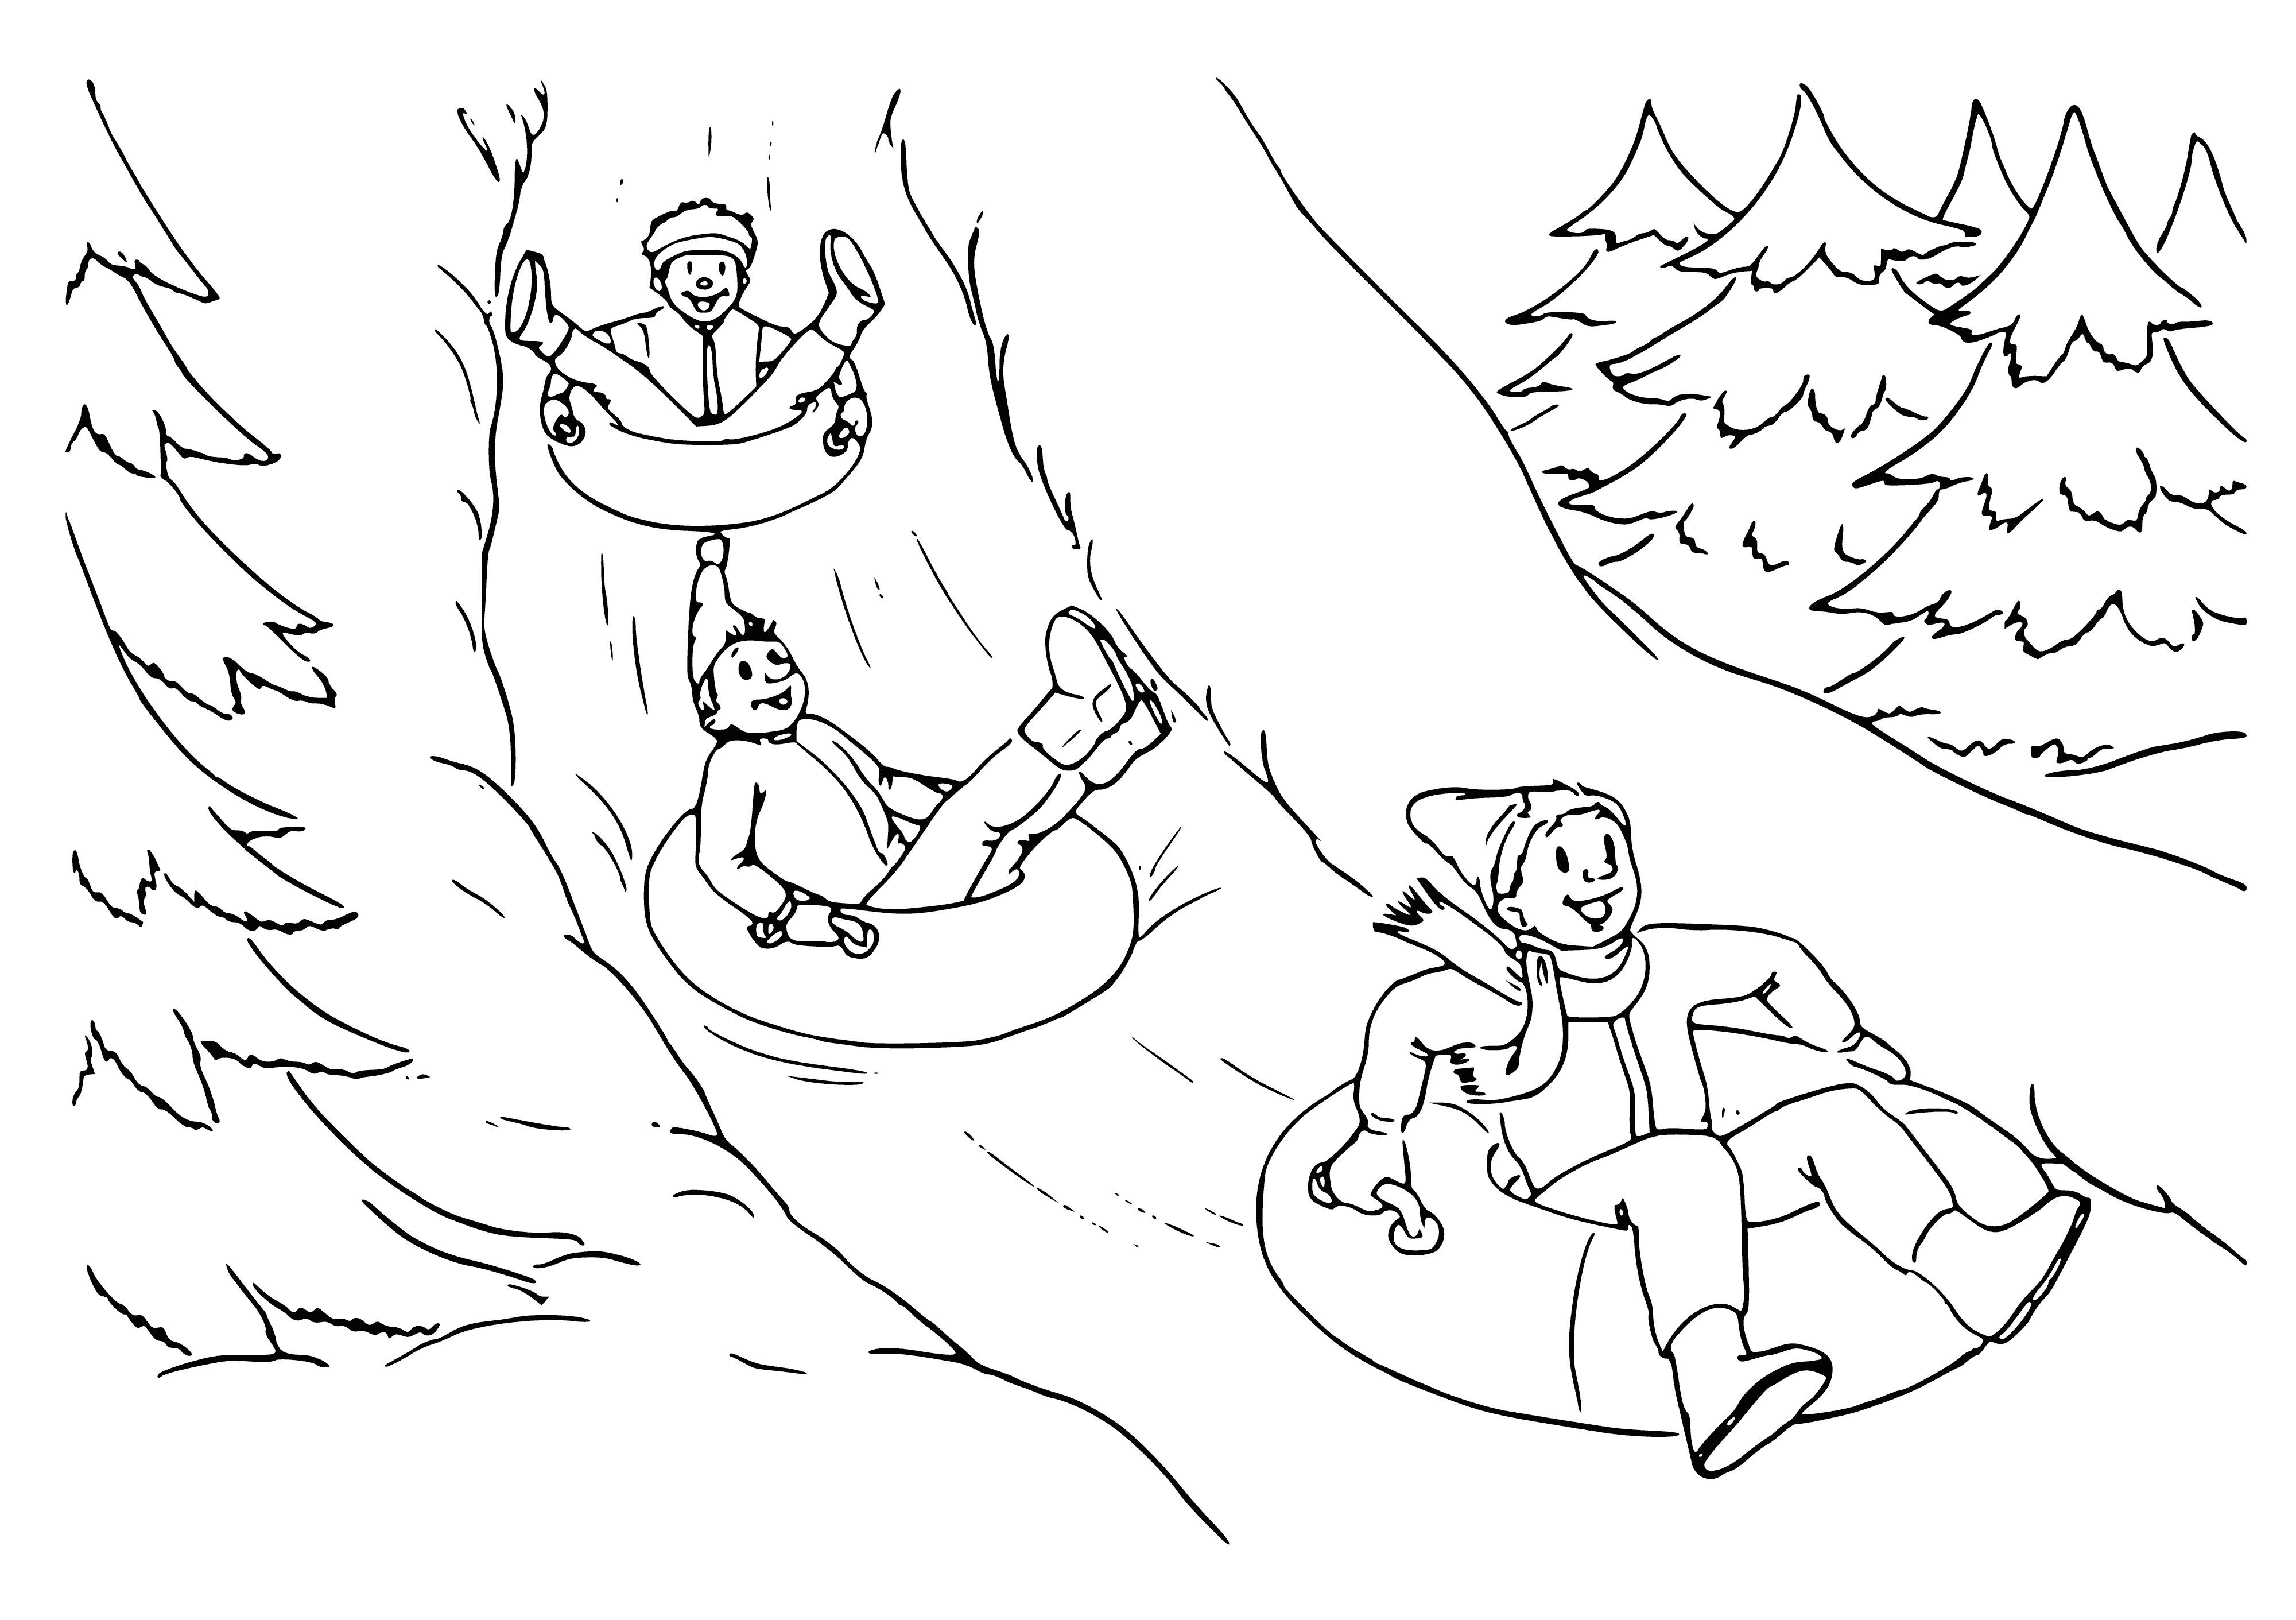 From a slide on a cheesecake coloring page